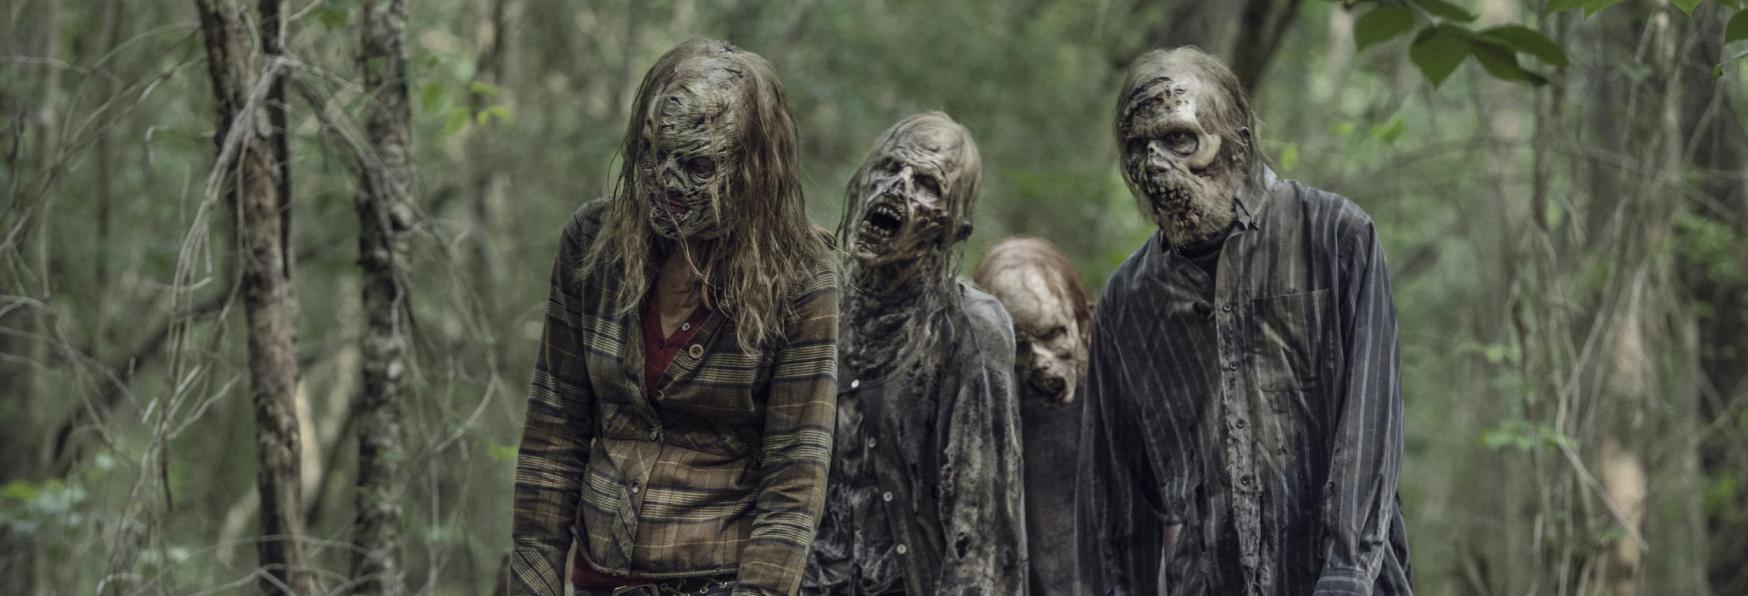 Tales of The Walking Dead: filming of the new TV Series Spin-off kicks off in Georgia